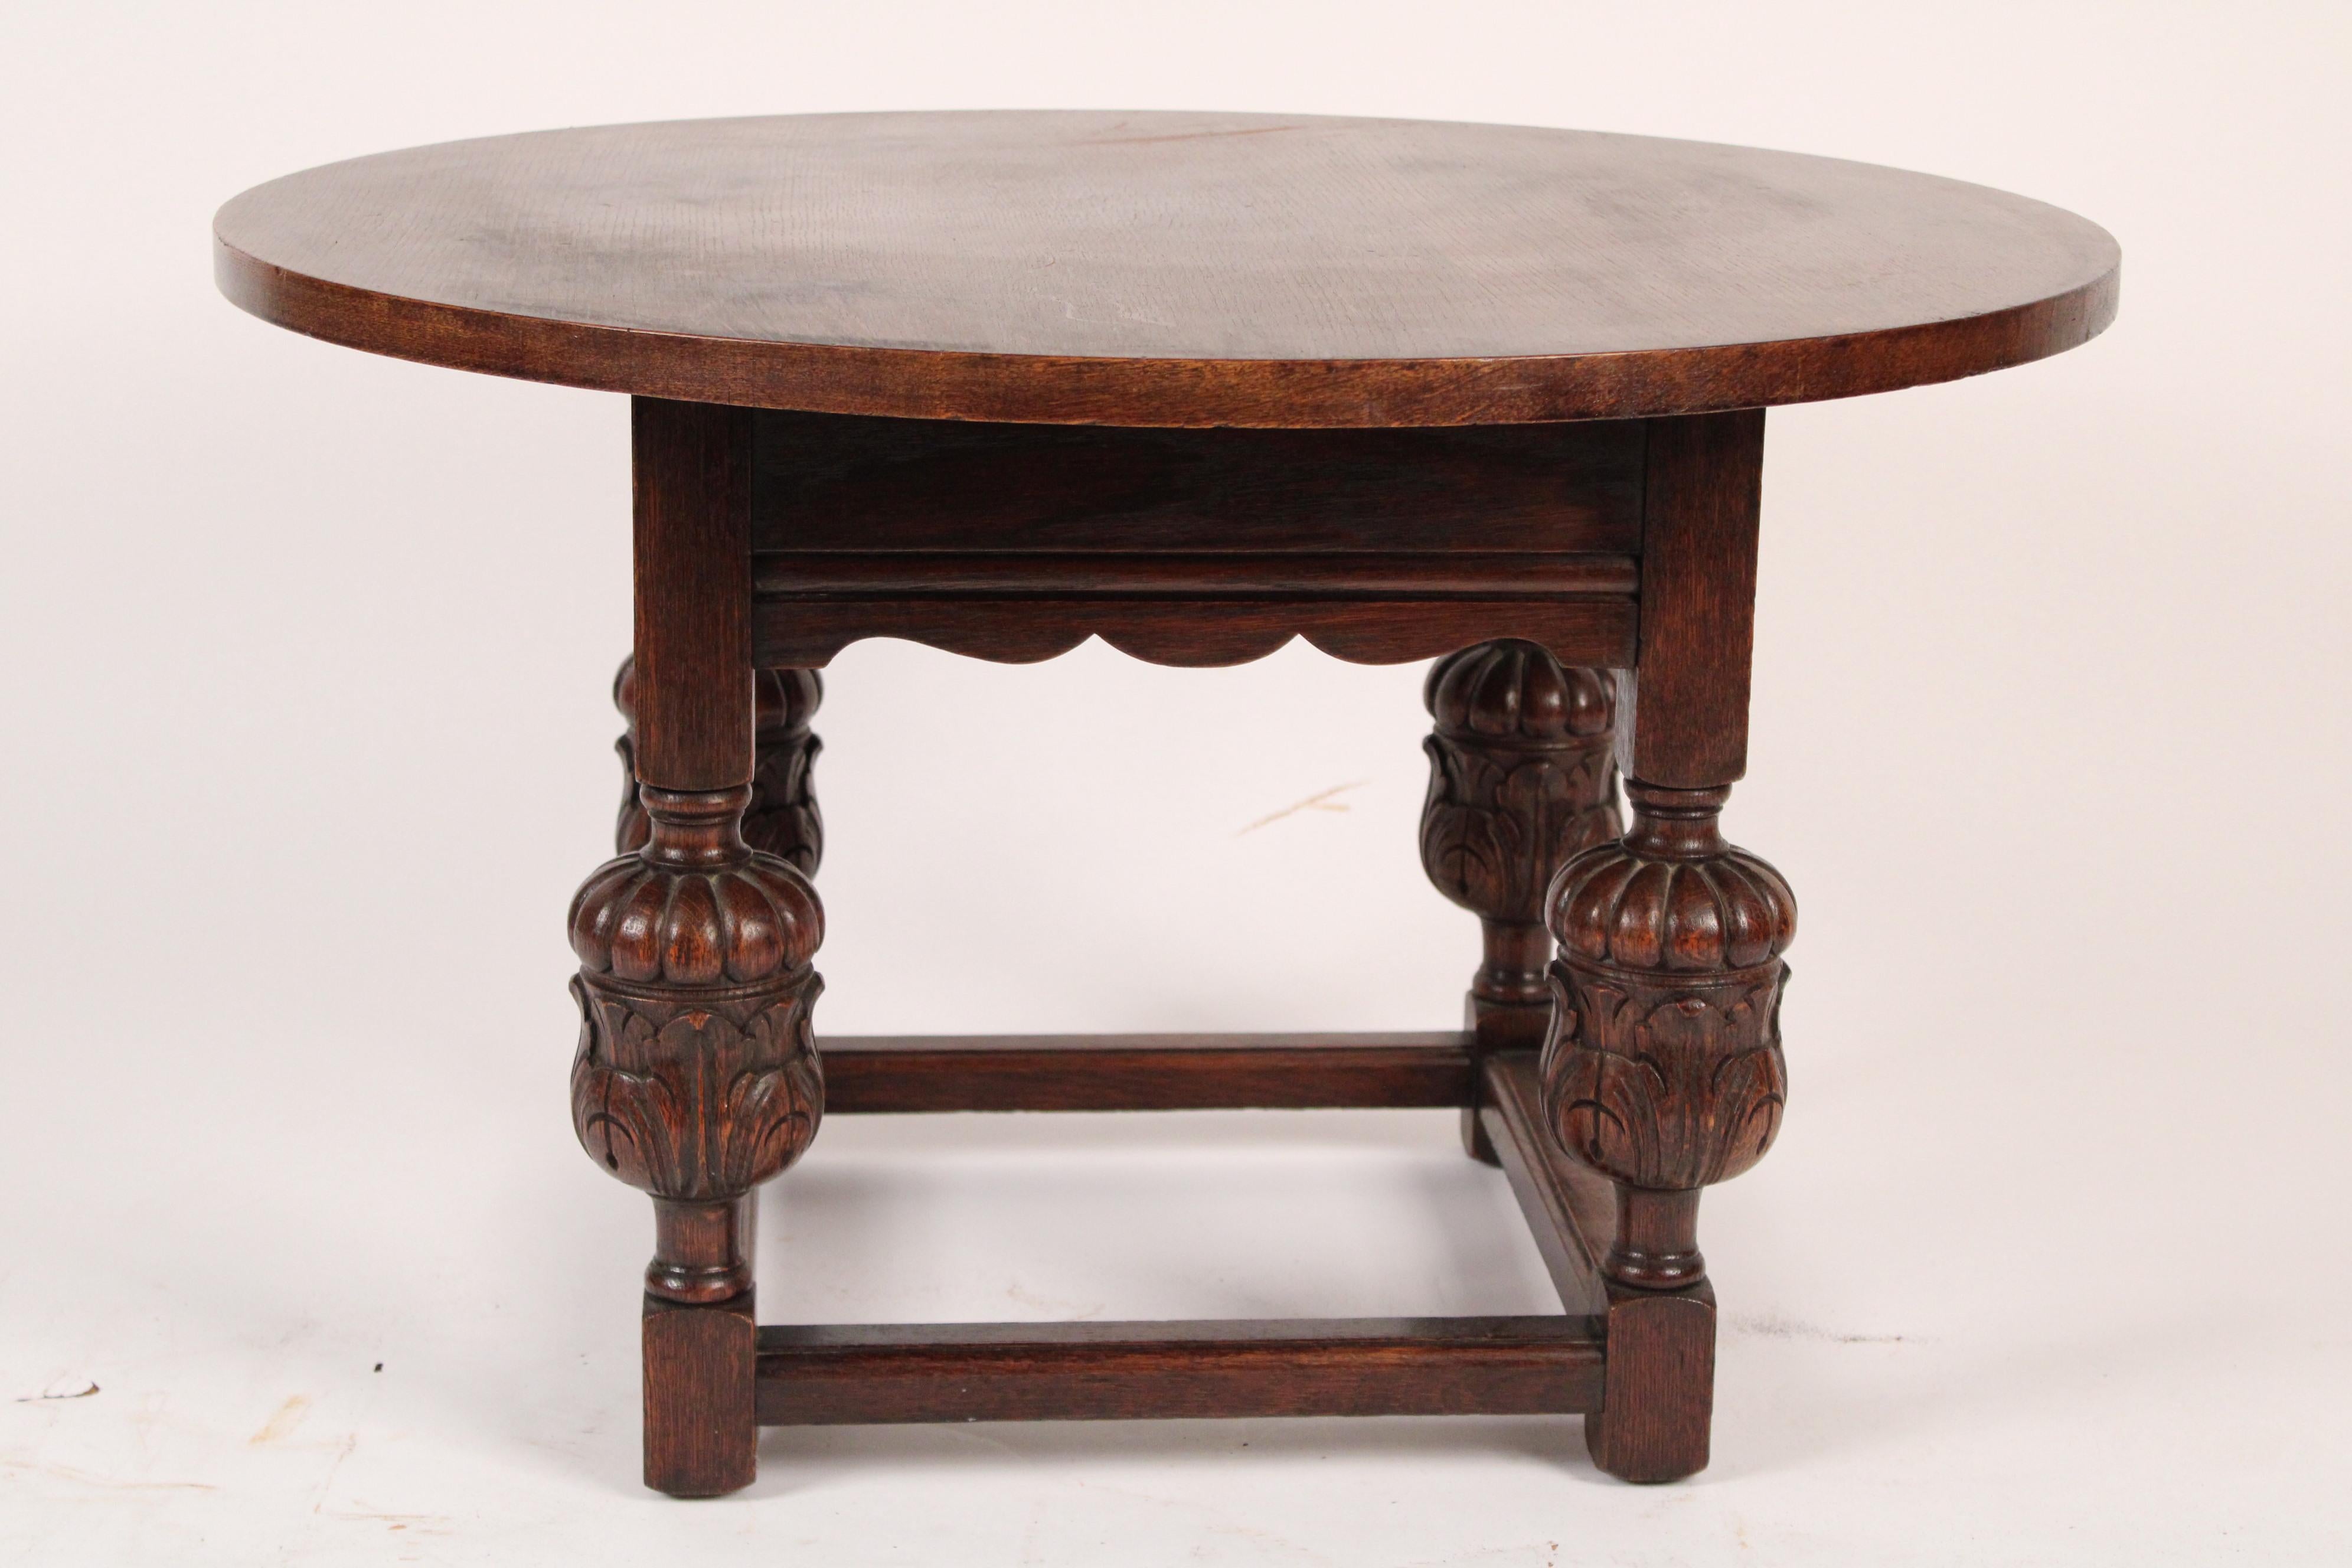 North American Spanish Revival Coffee Table